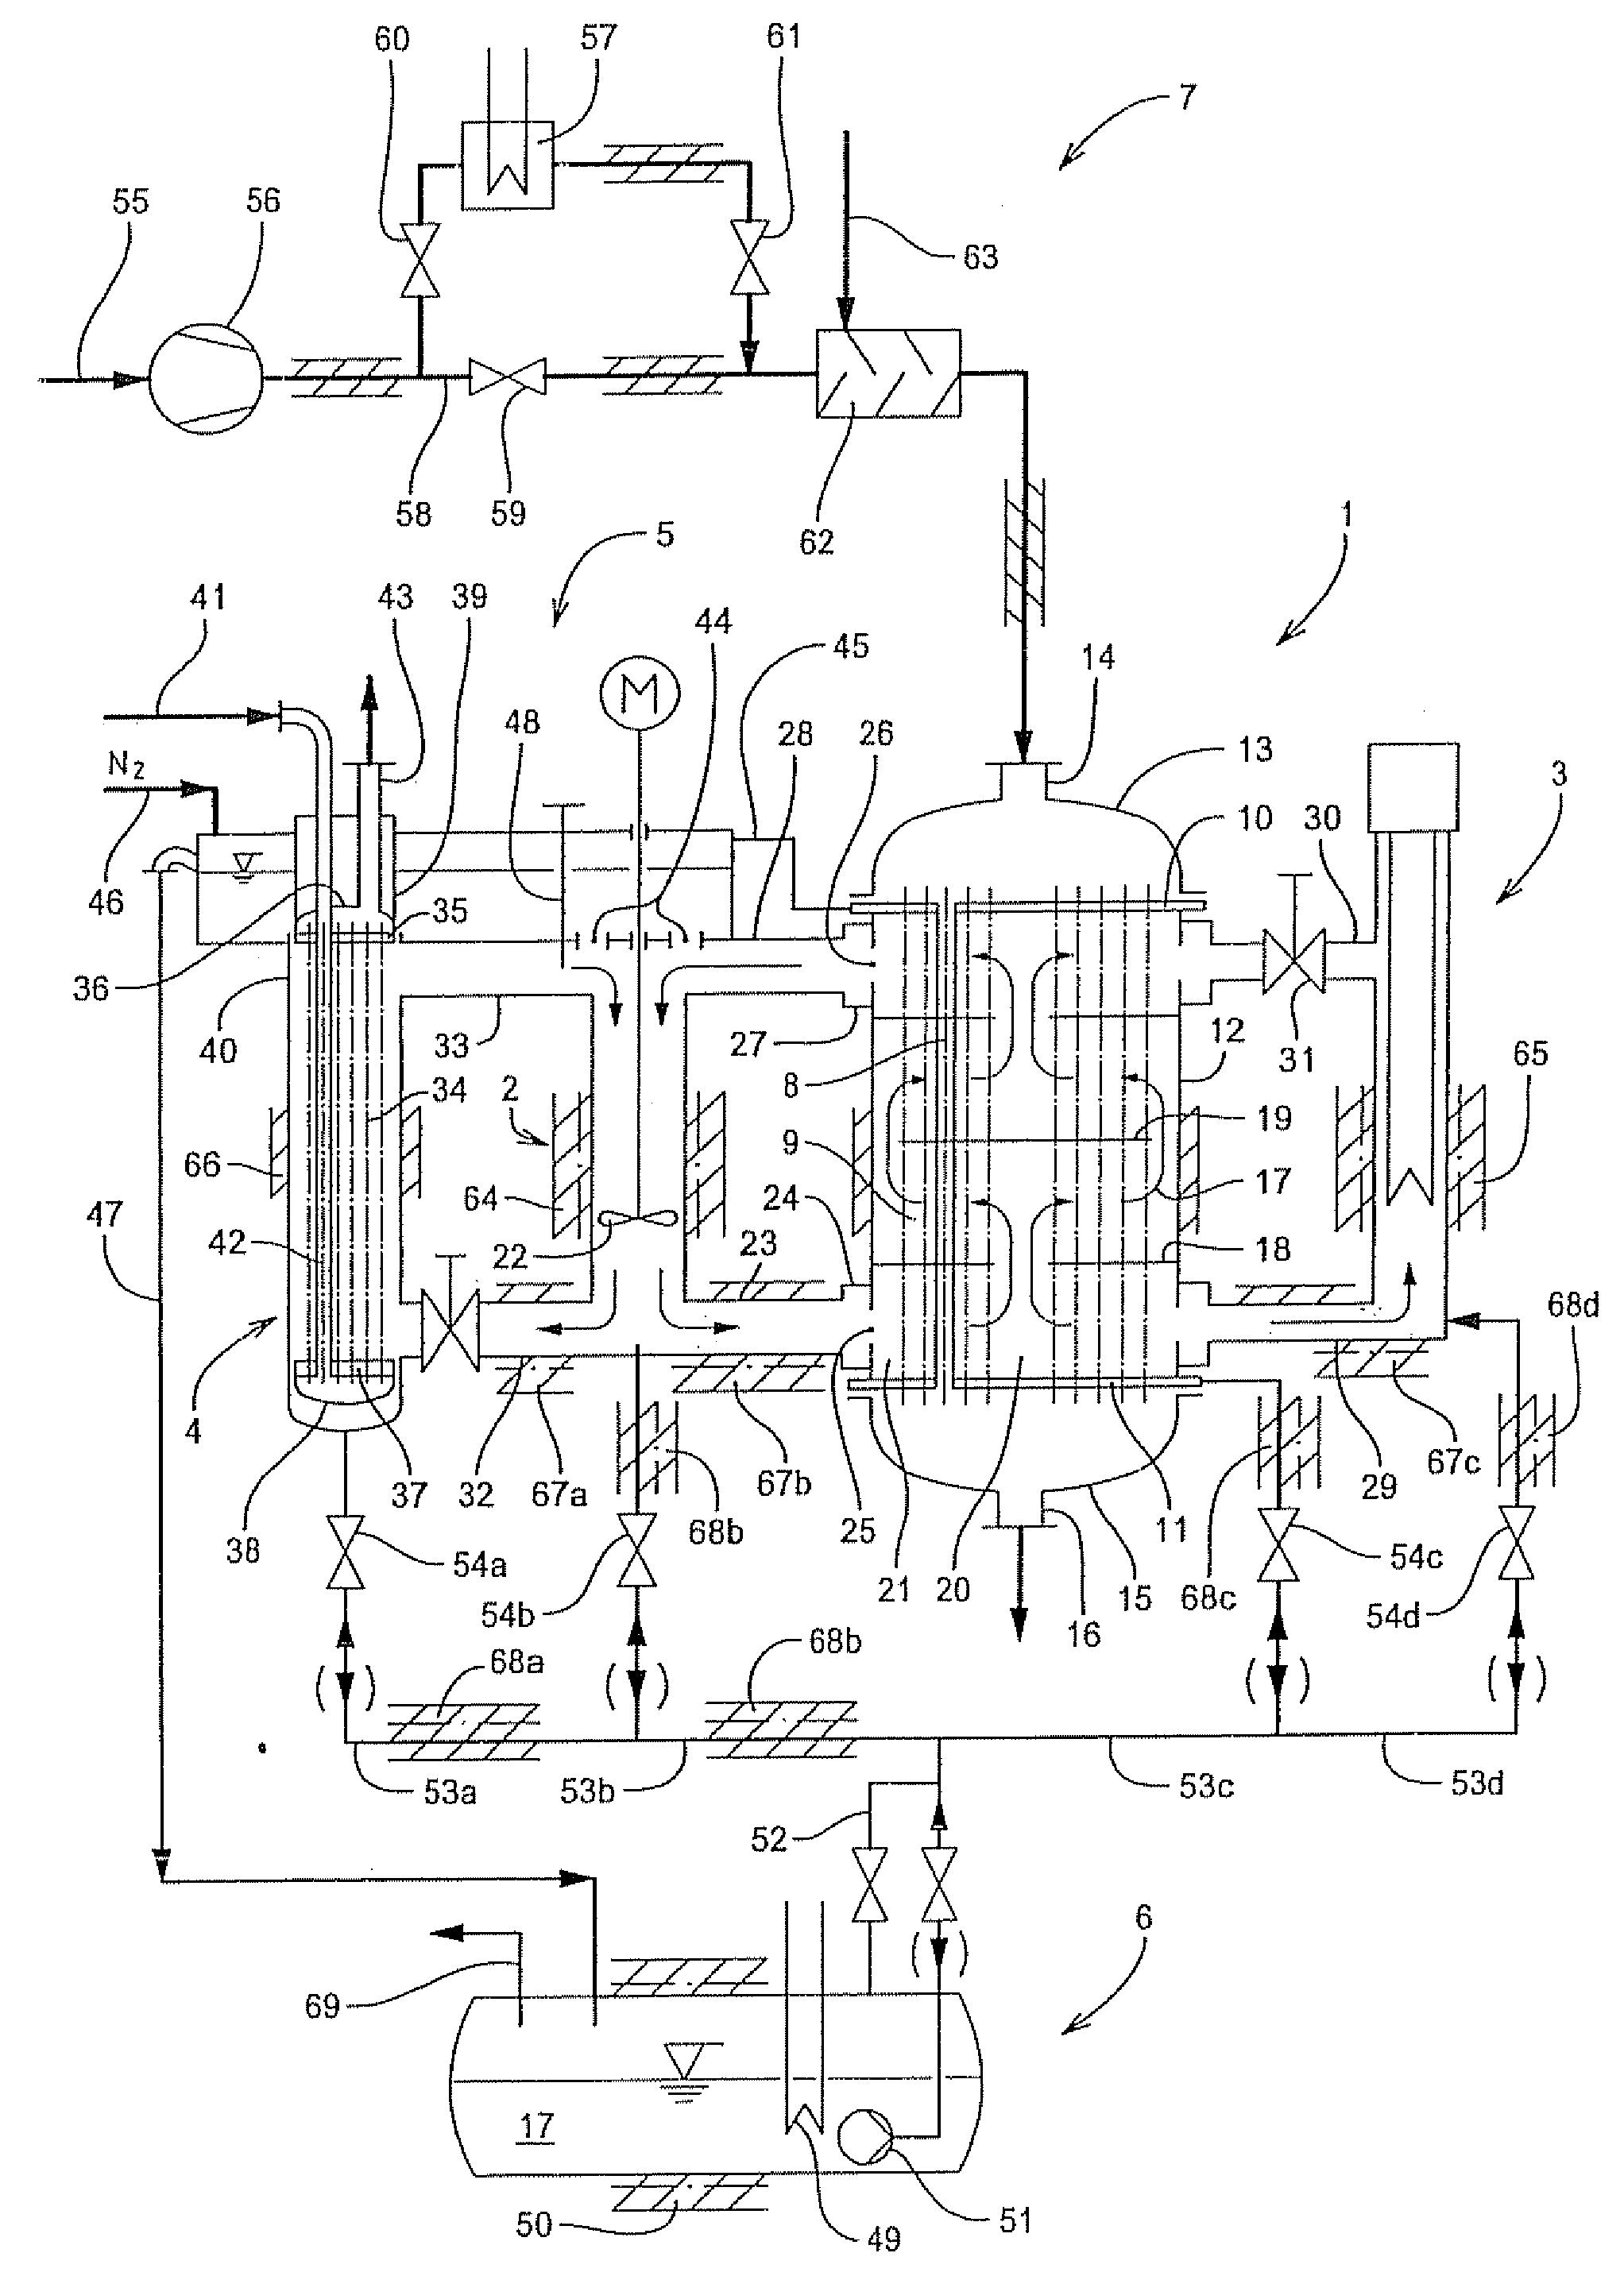 Method of varying the temperature of a tube bundle reactor